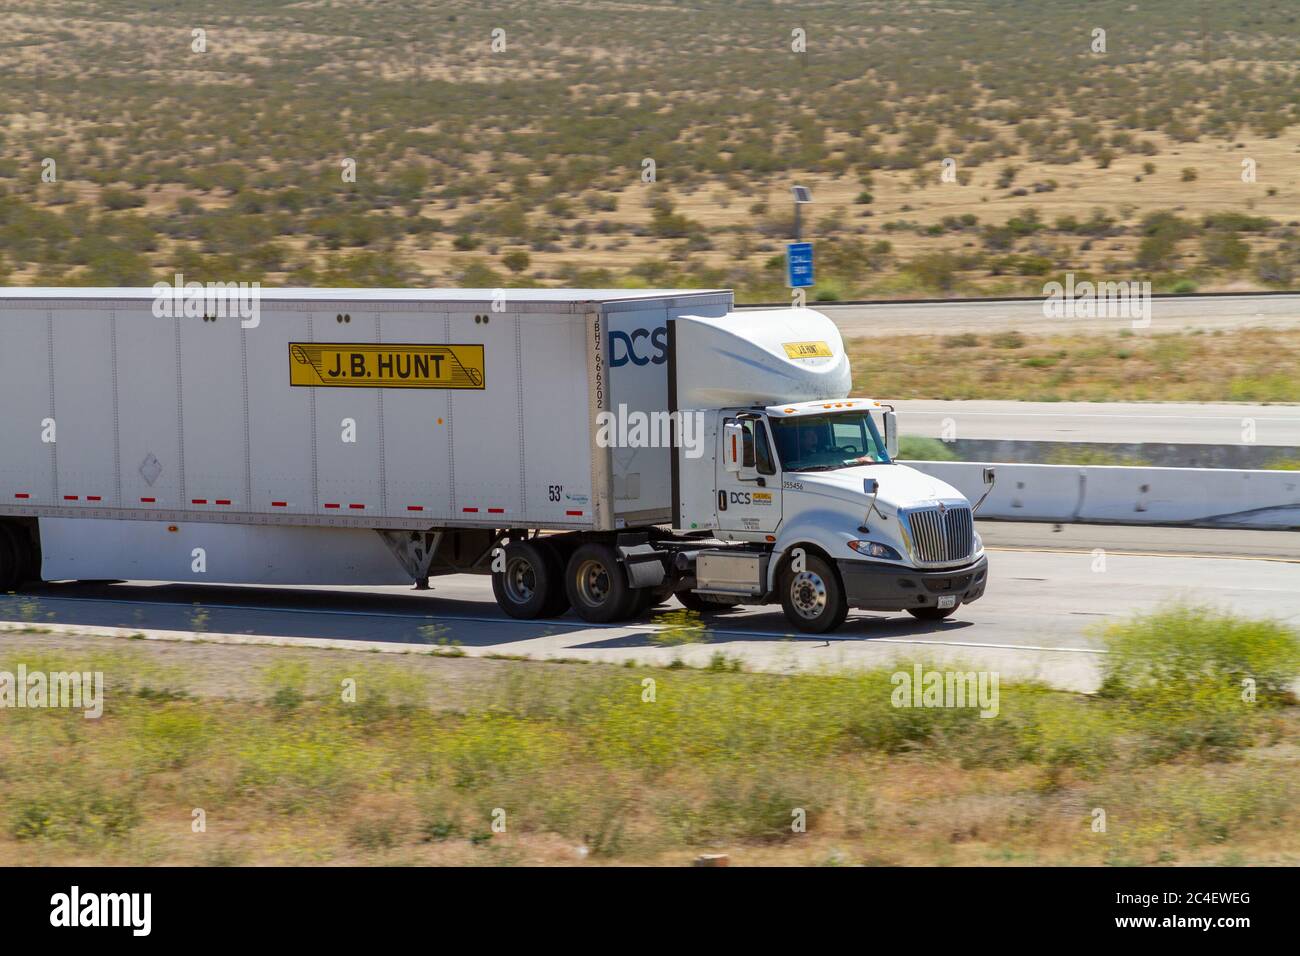 Apple Valley, CA / USA – May 16, 2020: White J.B. Hunt semi-truck on Interstate 15 in the Mojave Desert near the Town of Apple Valley, California. Stock Photo